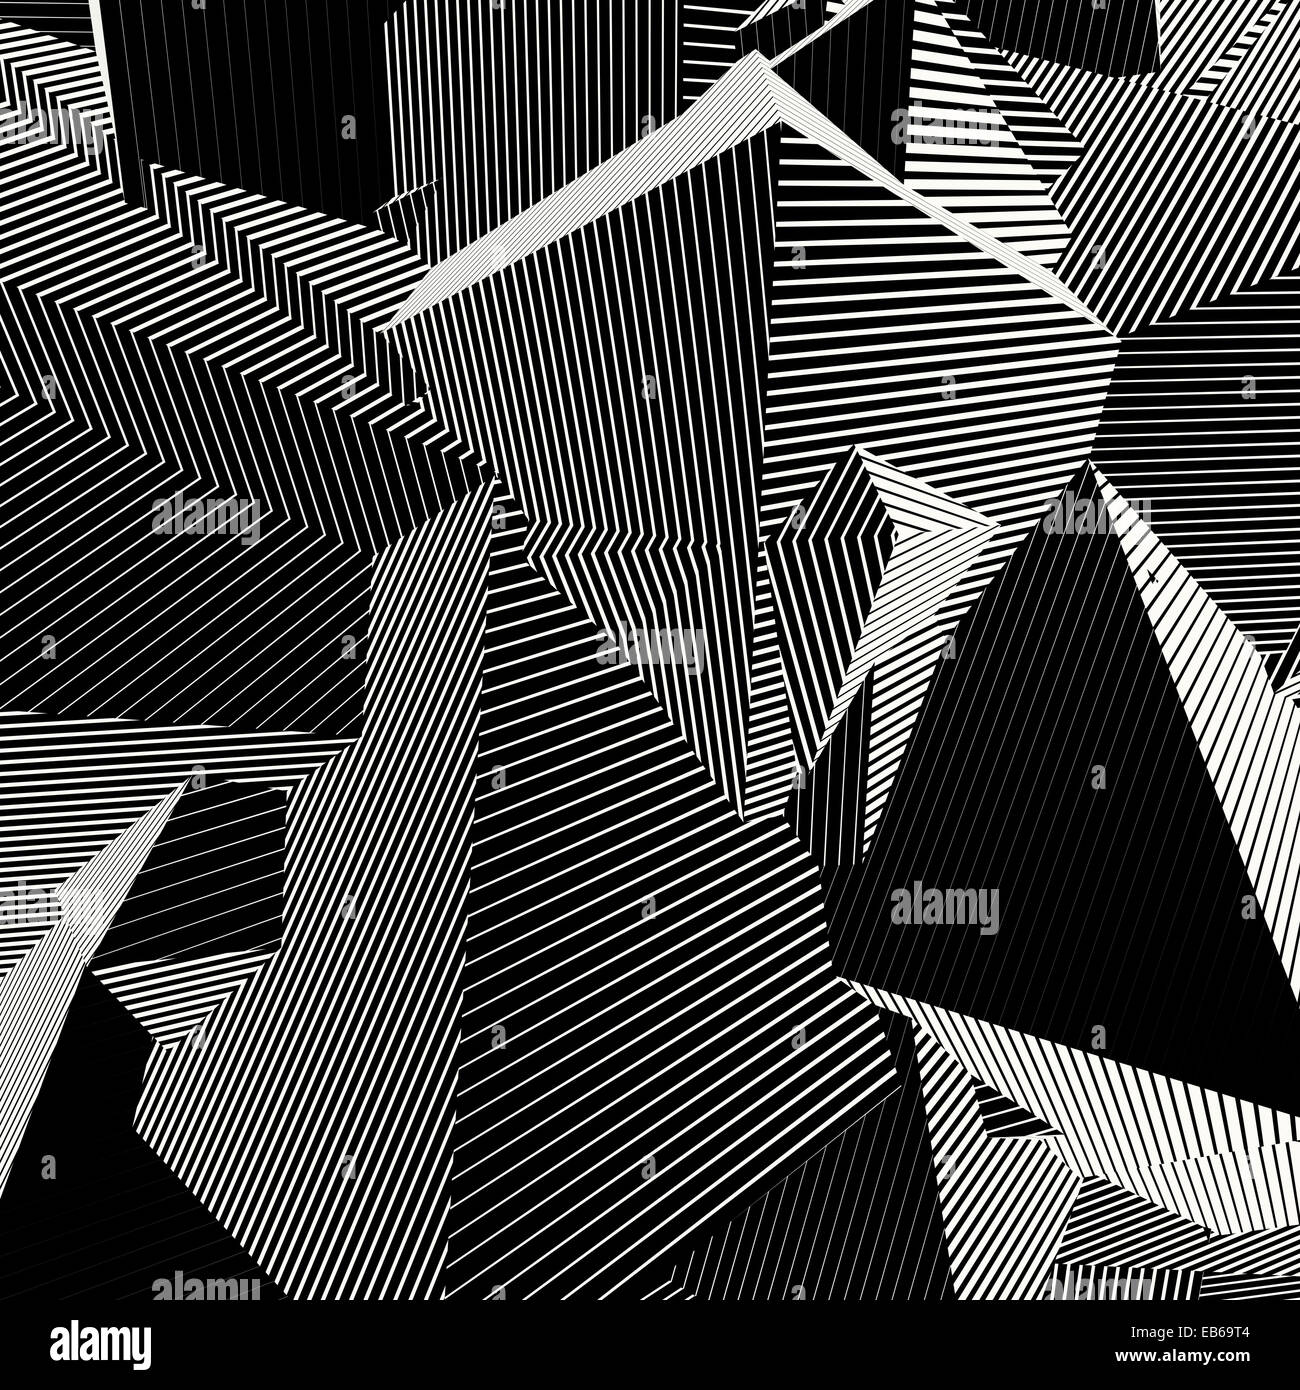 abstract striped shape background in black and white Stock Photo